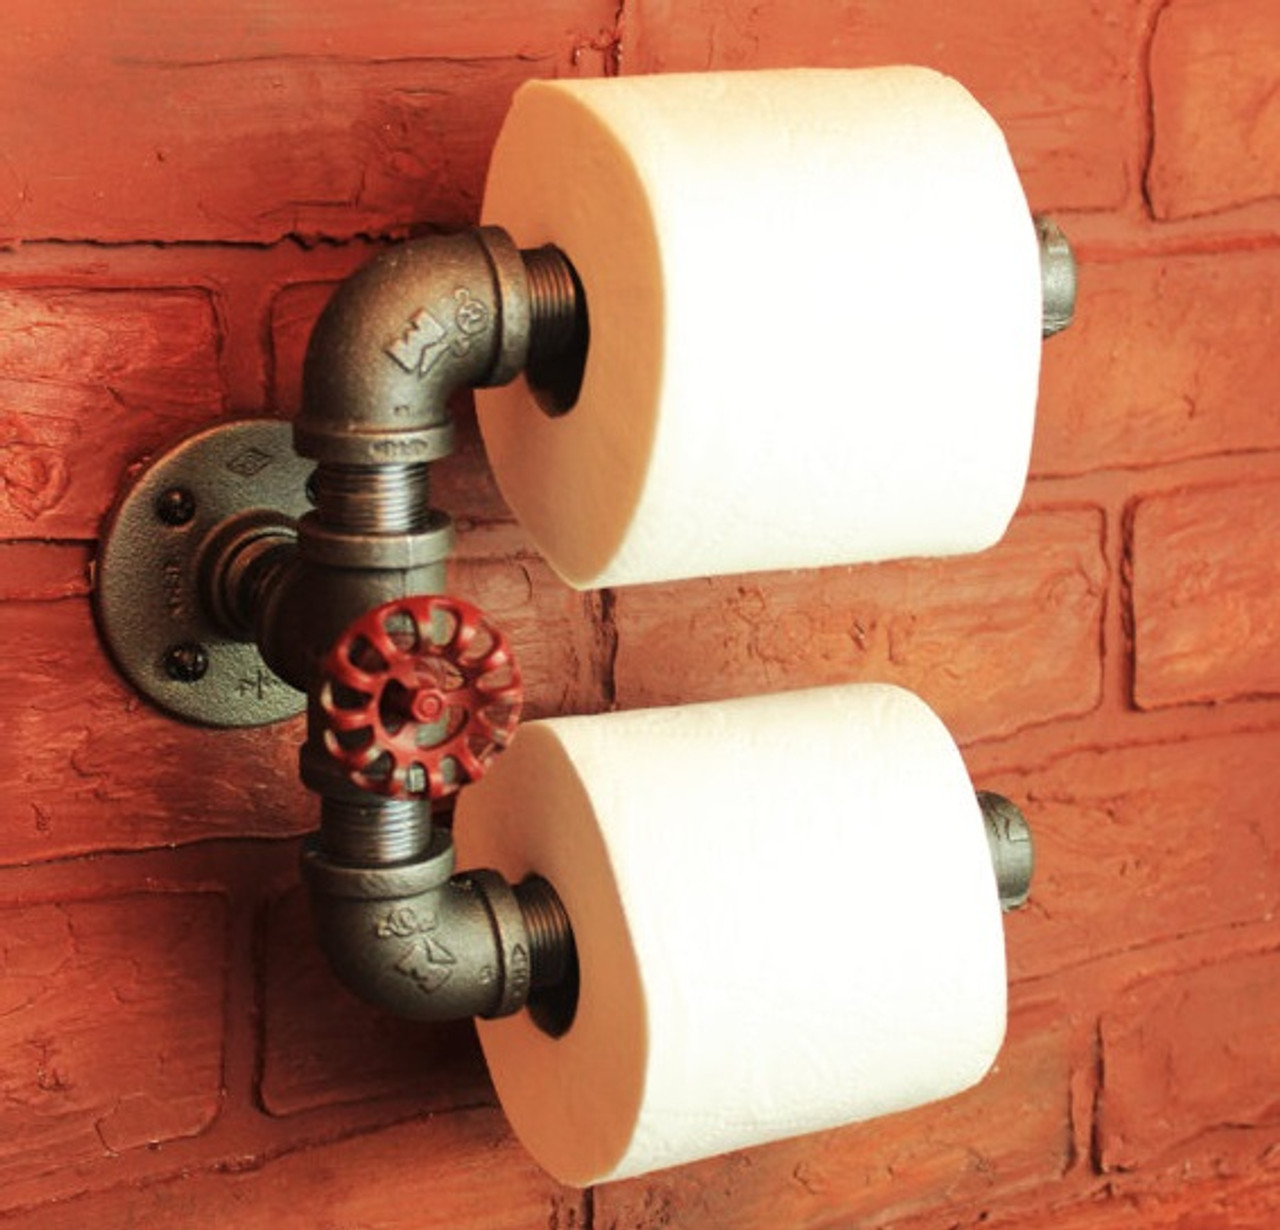 https://cdn11.bigcommerce.com/s-hcutf086j7/images/stencil/1280x1280/products/119/448/toilet_paper_holder_industrial_decor__59134.1502440419.jpg?c=2